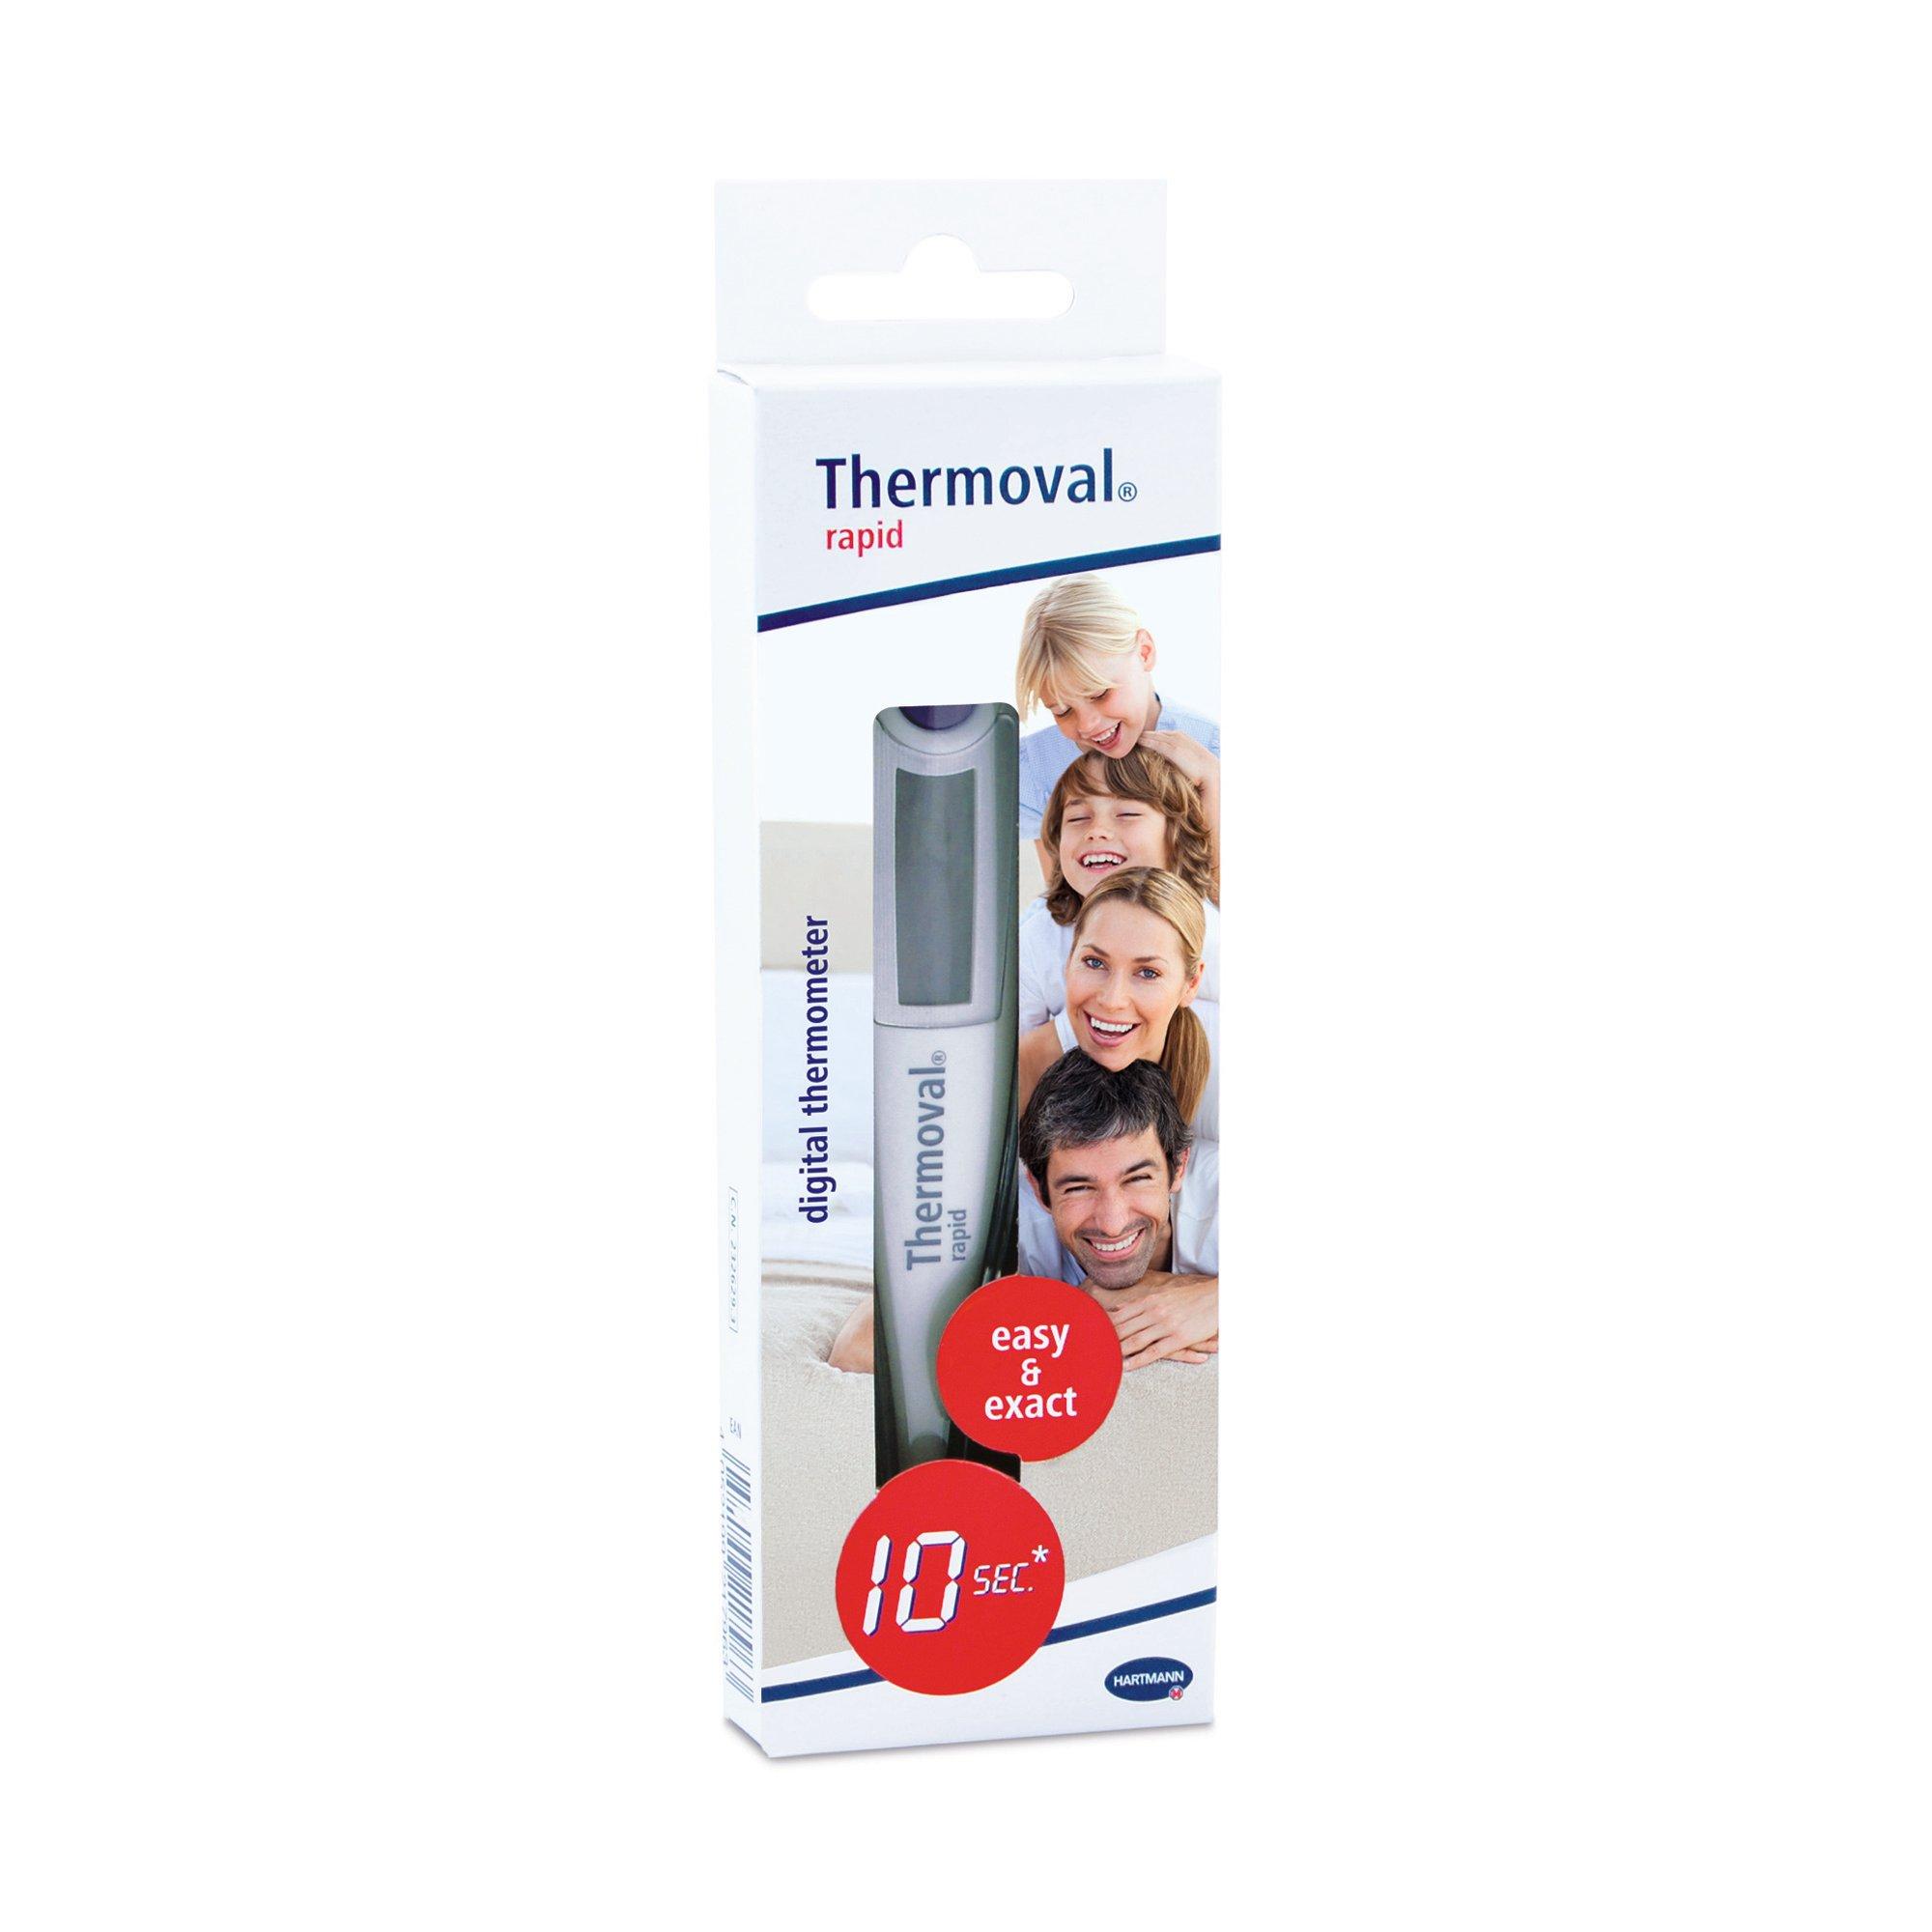 Image of Thermoval Fieberthermometer rapid 10 sec